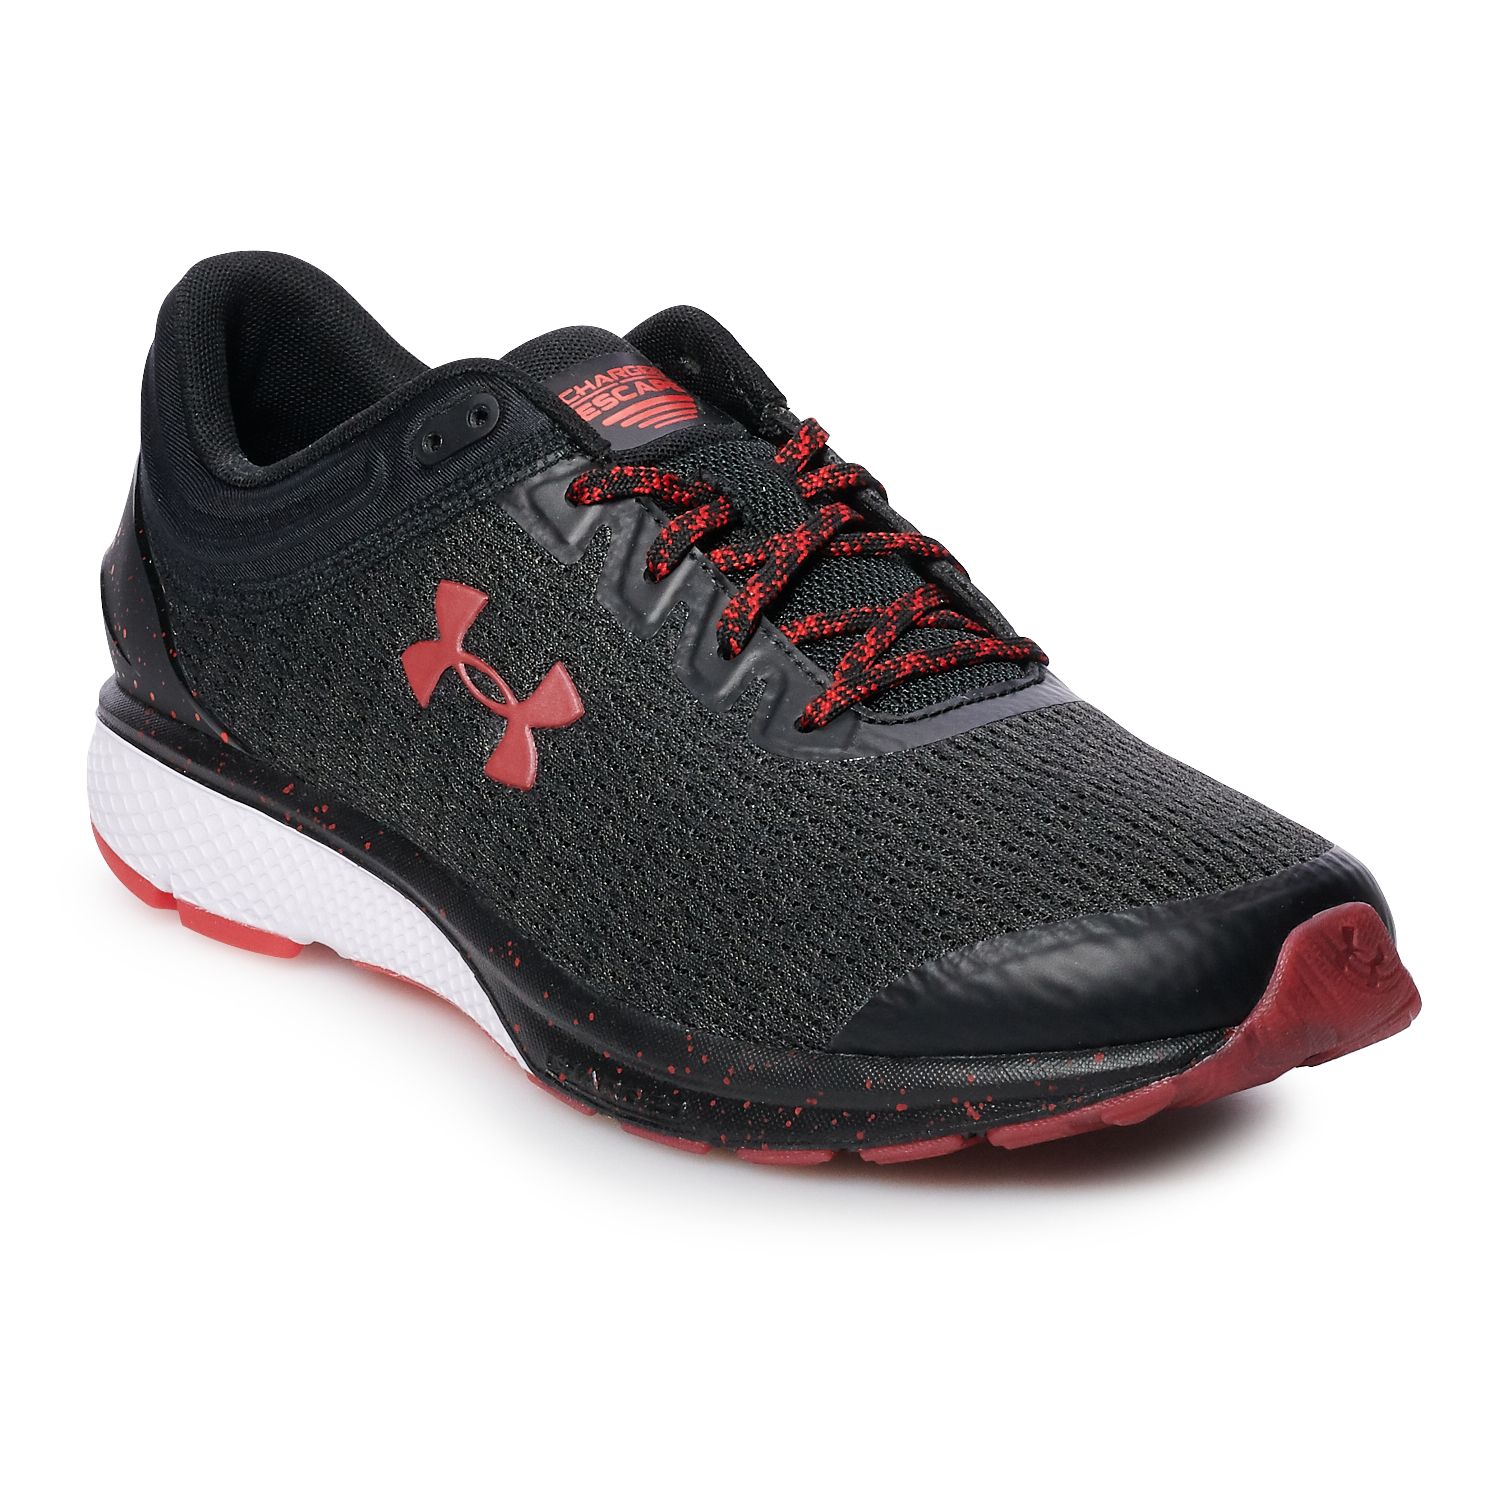 under armour men's charged escape running shoe